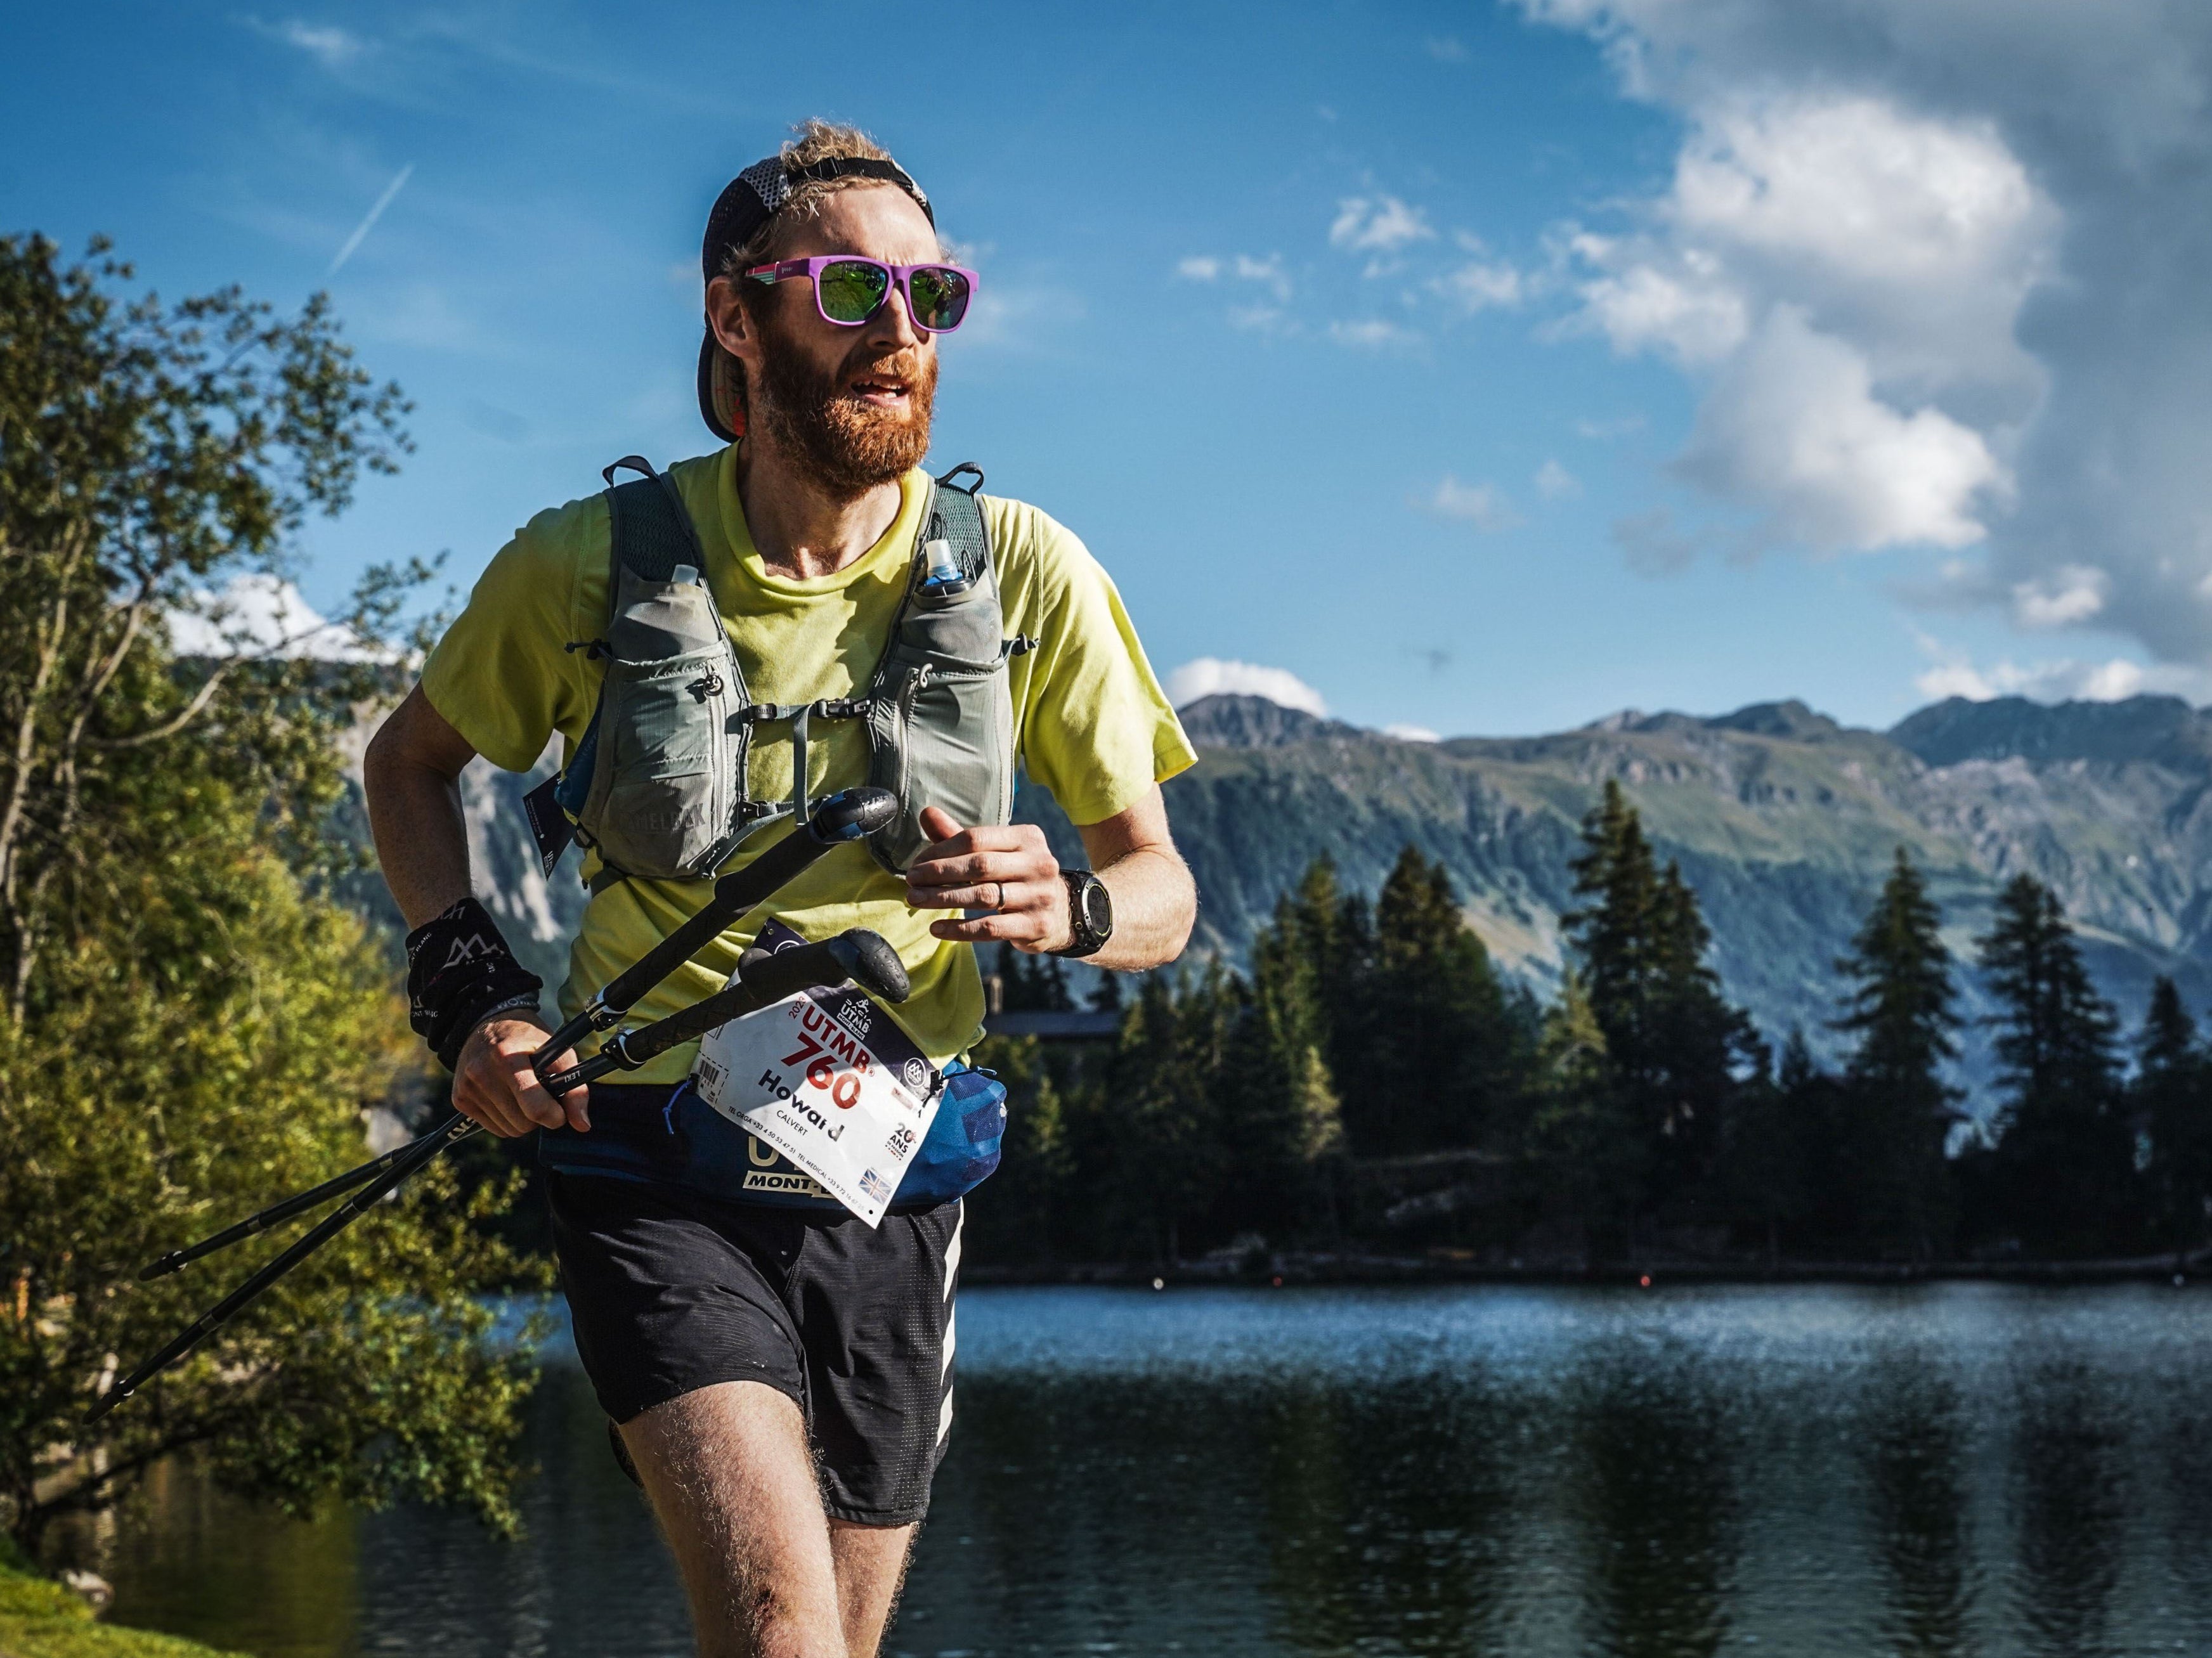 The UTMB is the ultimate endurance test, but the Alpine backdrop makes it worth it